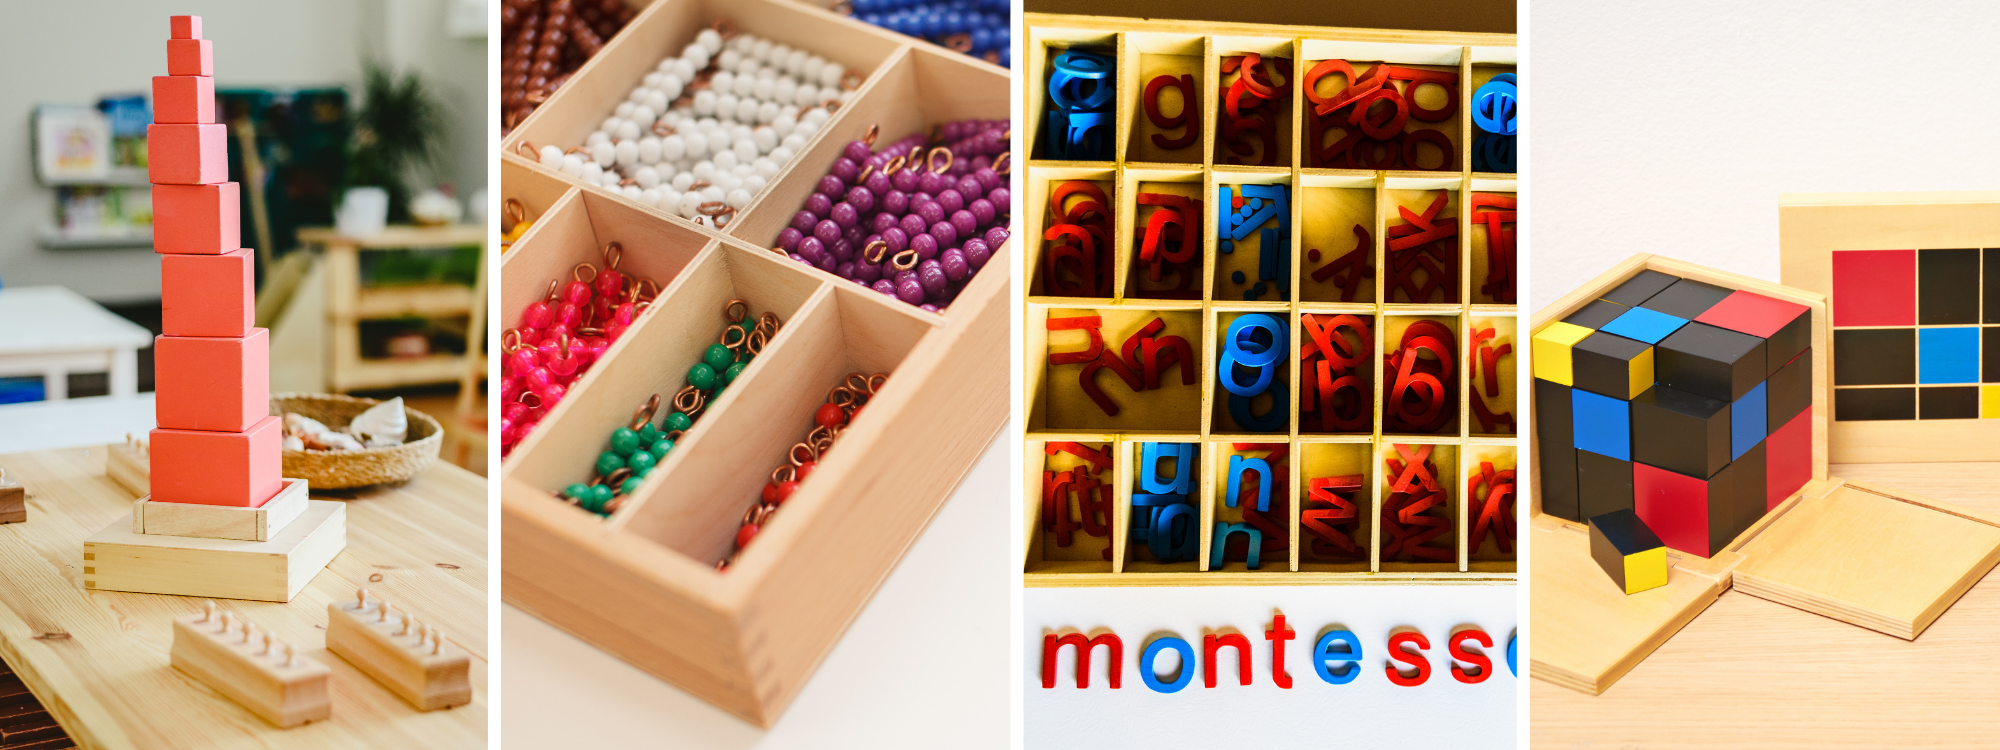 This section shows four images. First, a classic Montessori material known as the Pink Tower is sitting in the middle of a wooden table with a basket and other materials surrounding it. The background shows shelves and a plant. Second, a wooden box of beads spanning from one to ten. Third, a wooden box with all letter of the alphabet to practice spelling and visualize vowels. Last is a Montessori Binomial Trinomial Cube for working on math logic.